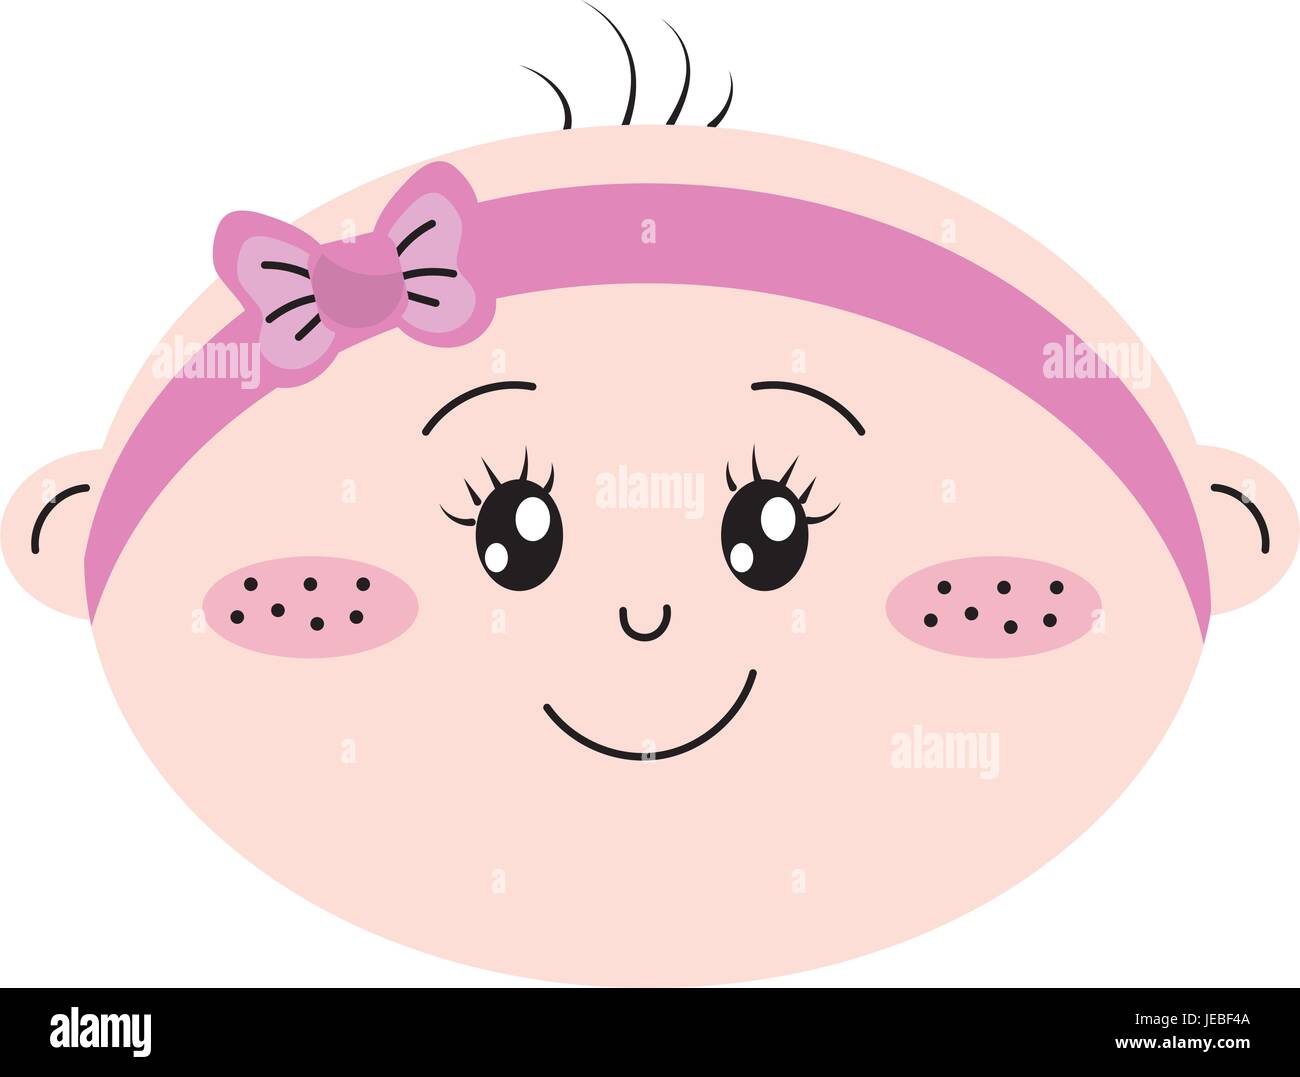 Download cute baby girl face with ribbon bow in the head Stock ...